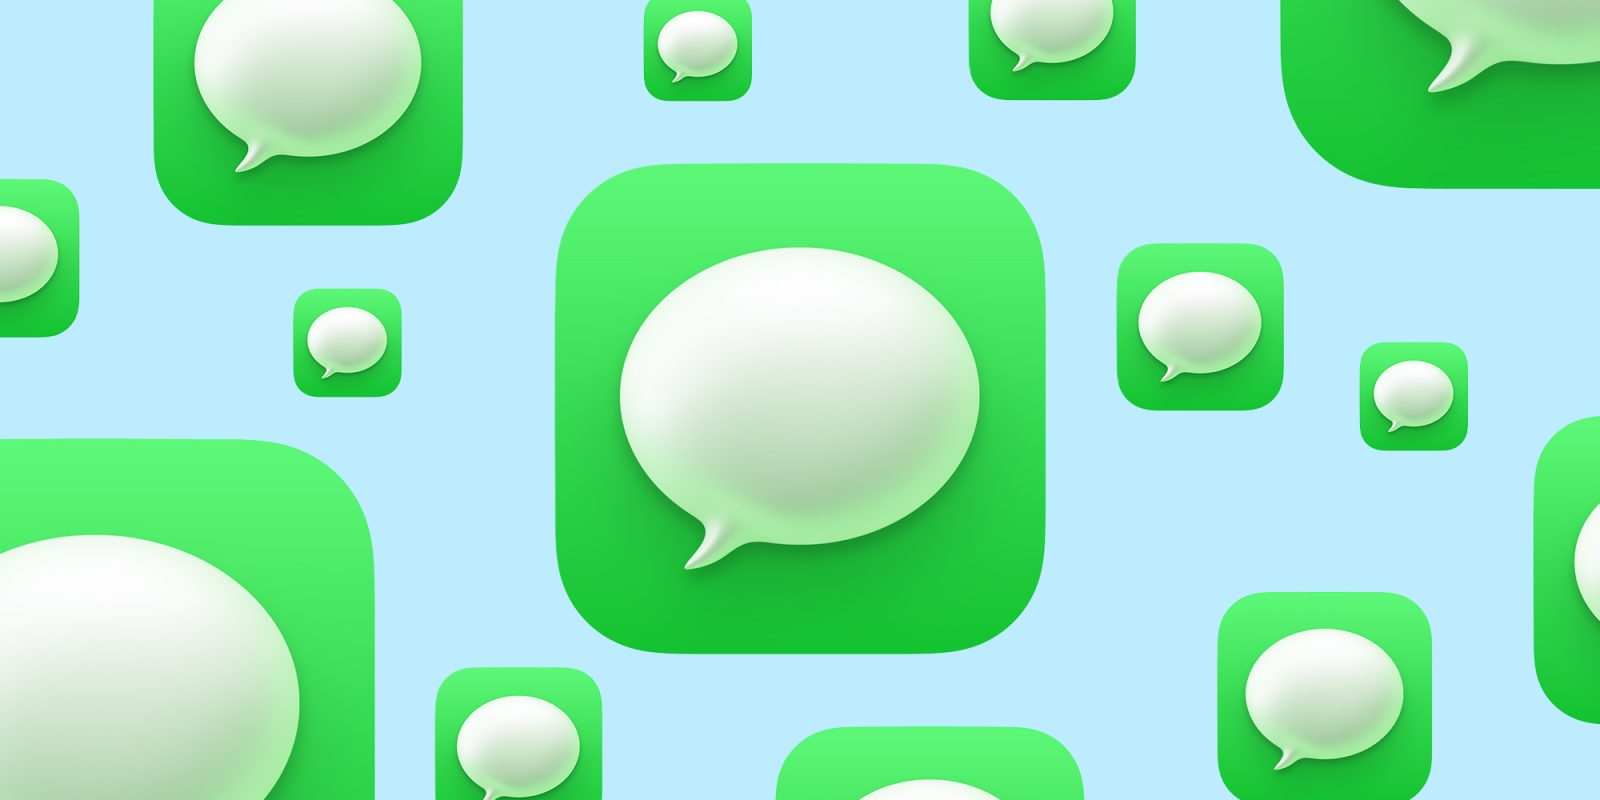 eu to make imessage and other messaging apps interoperable - 9to5mac